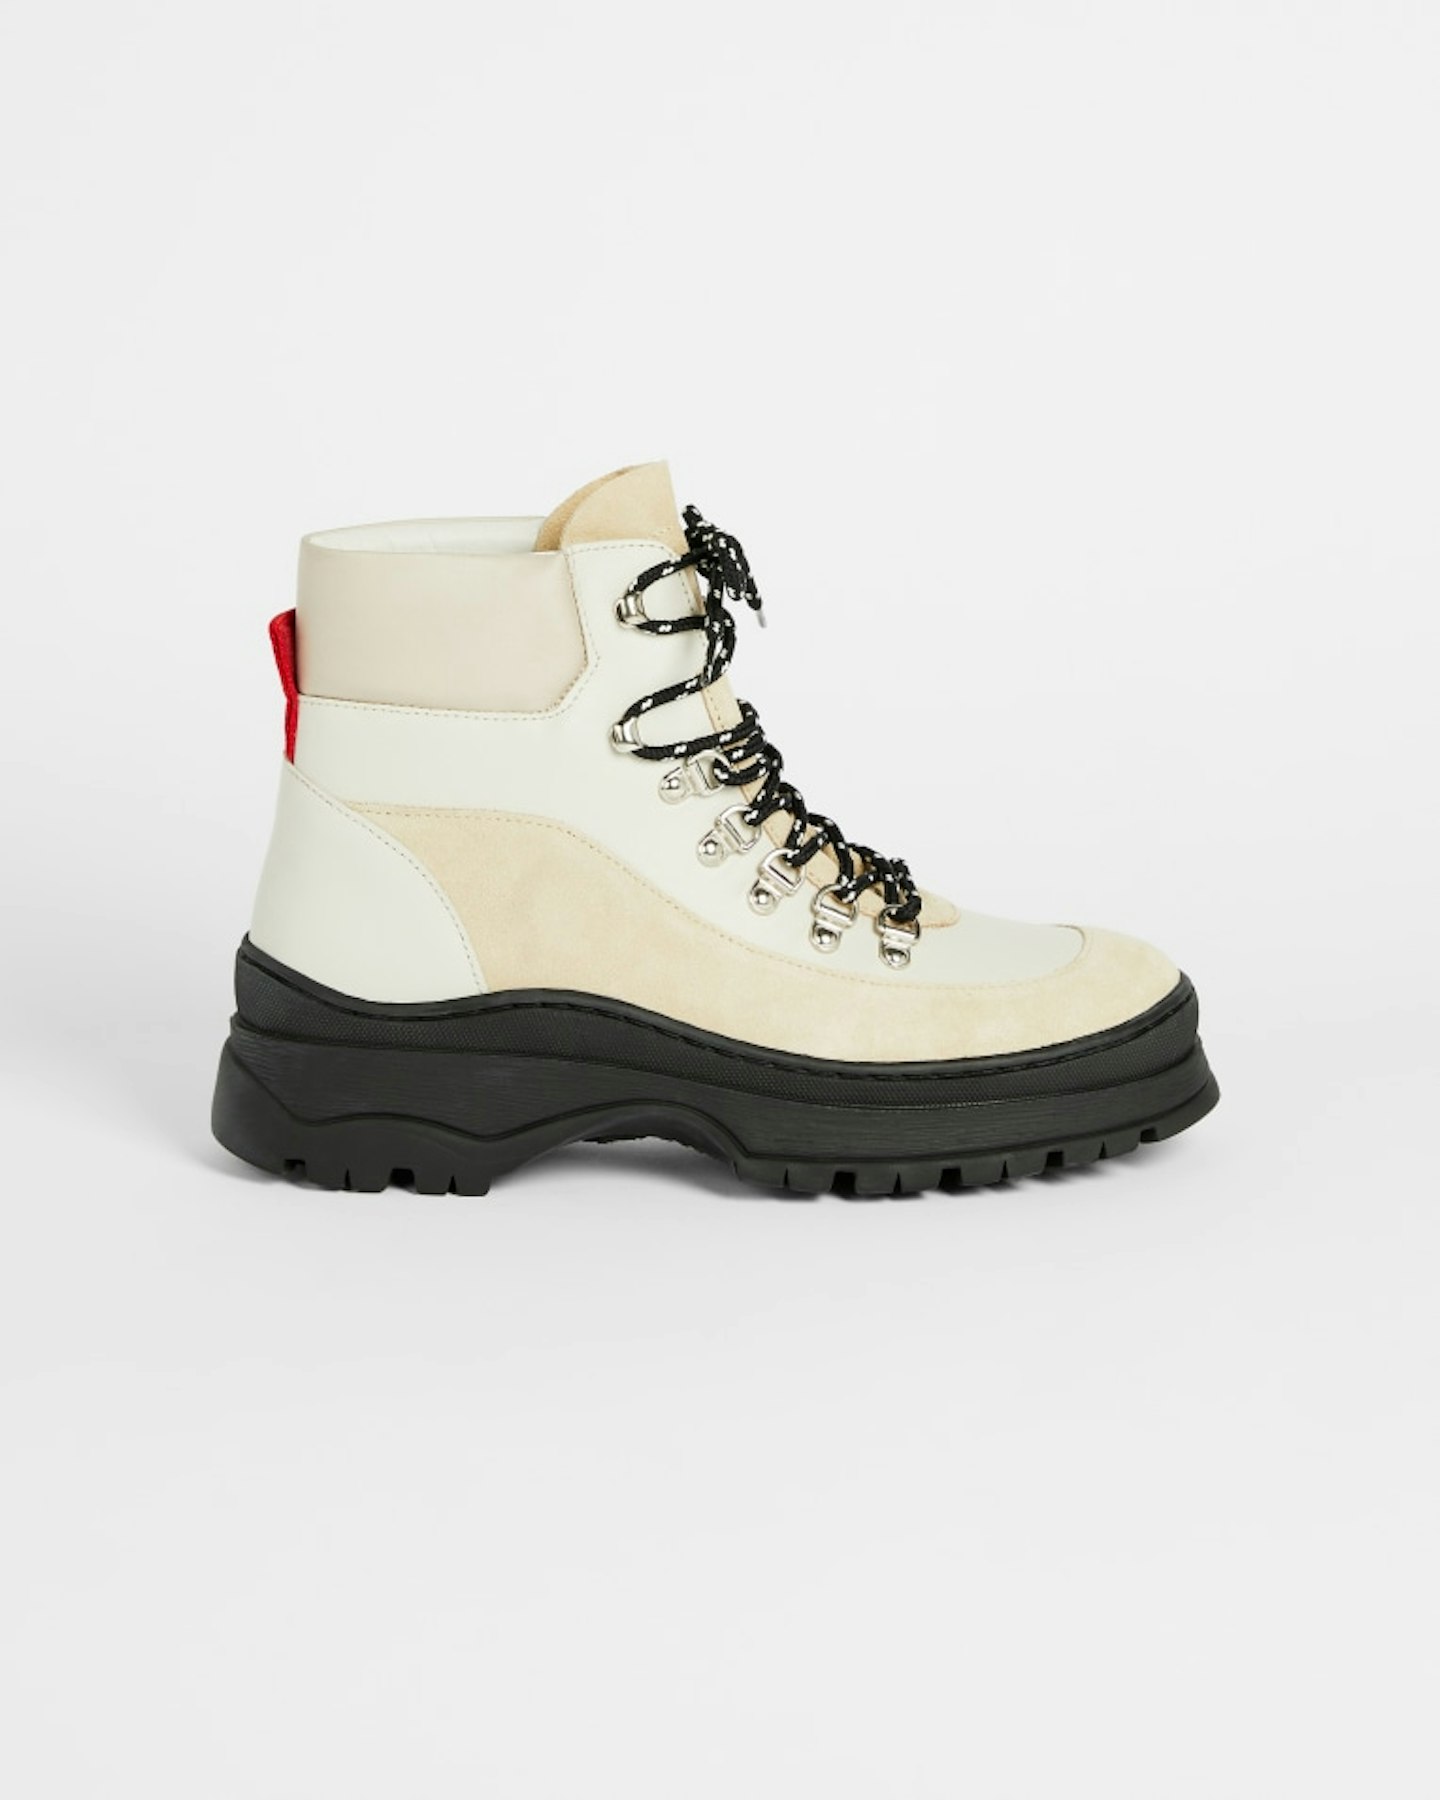 Ted Baker, Leather and suede hiker boot, WAS £175 NOW £122